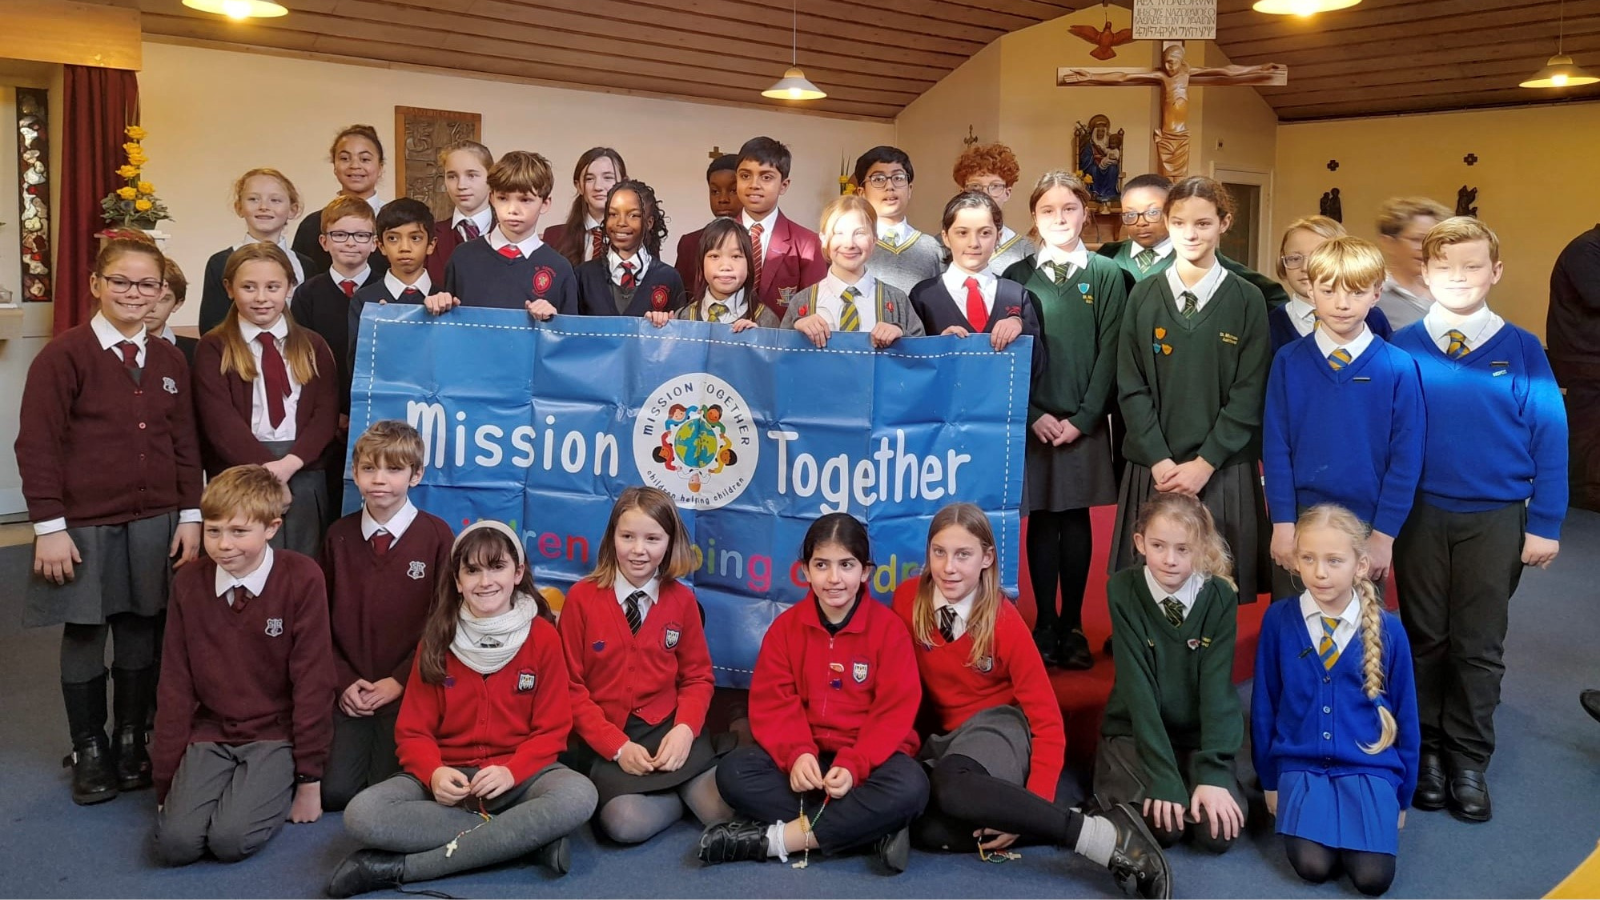 Starting the year with a celebration of Mission – Together!